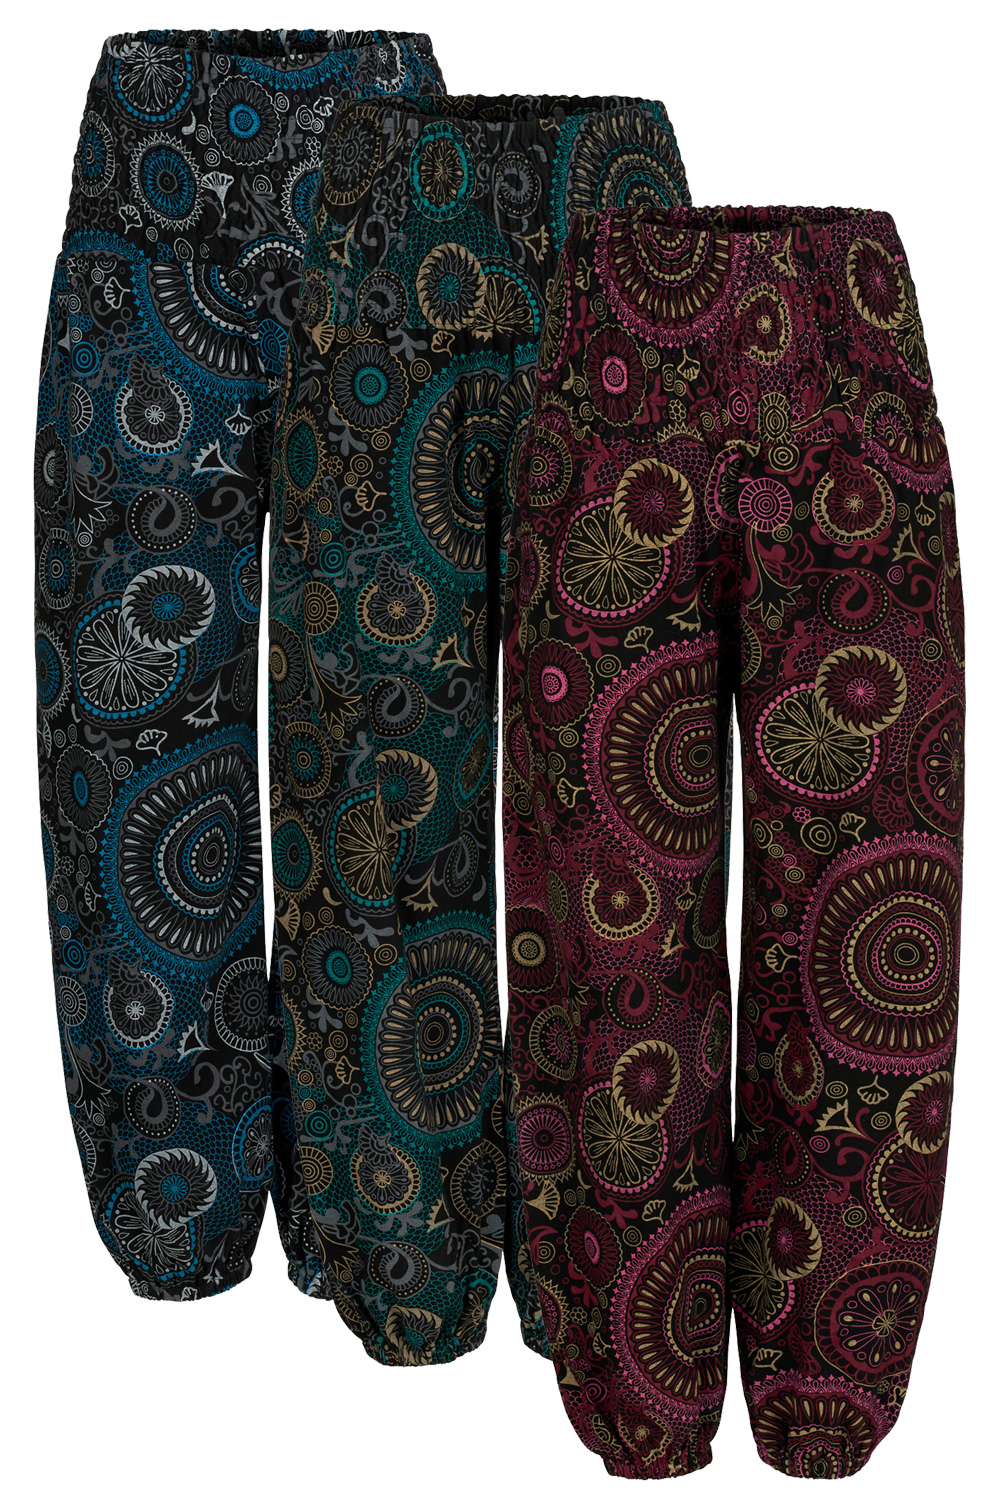 Mandala print baggy trousers with pockets - S/M only